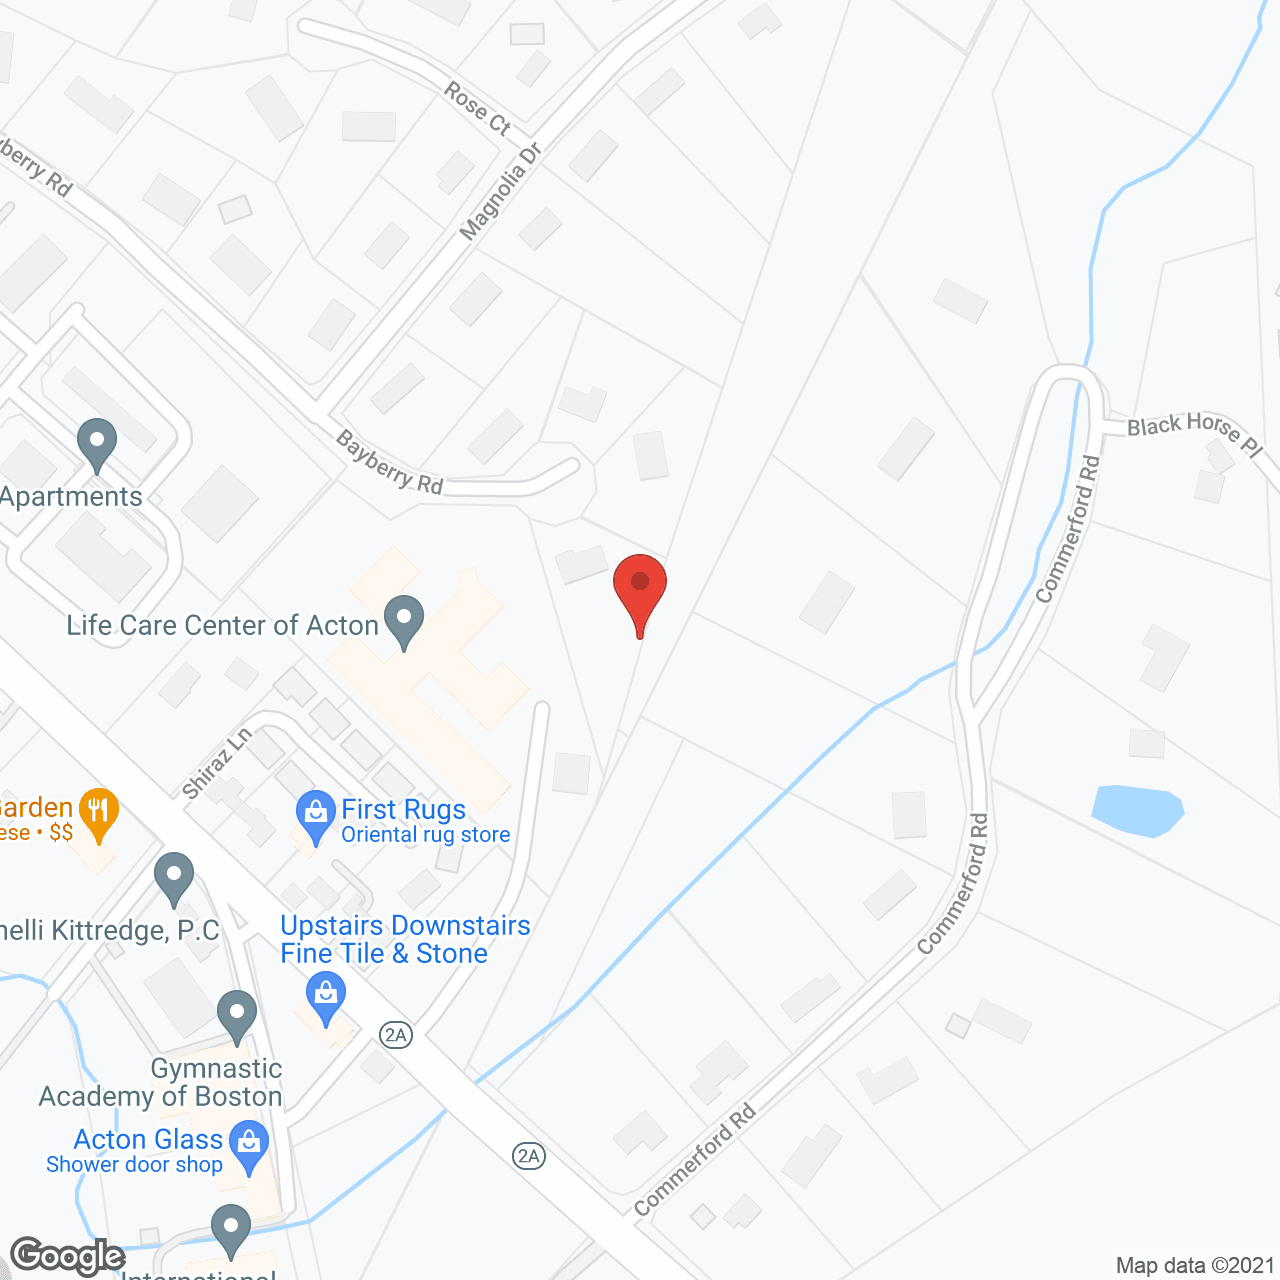 Life Care Center of Acton in google map